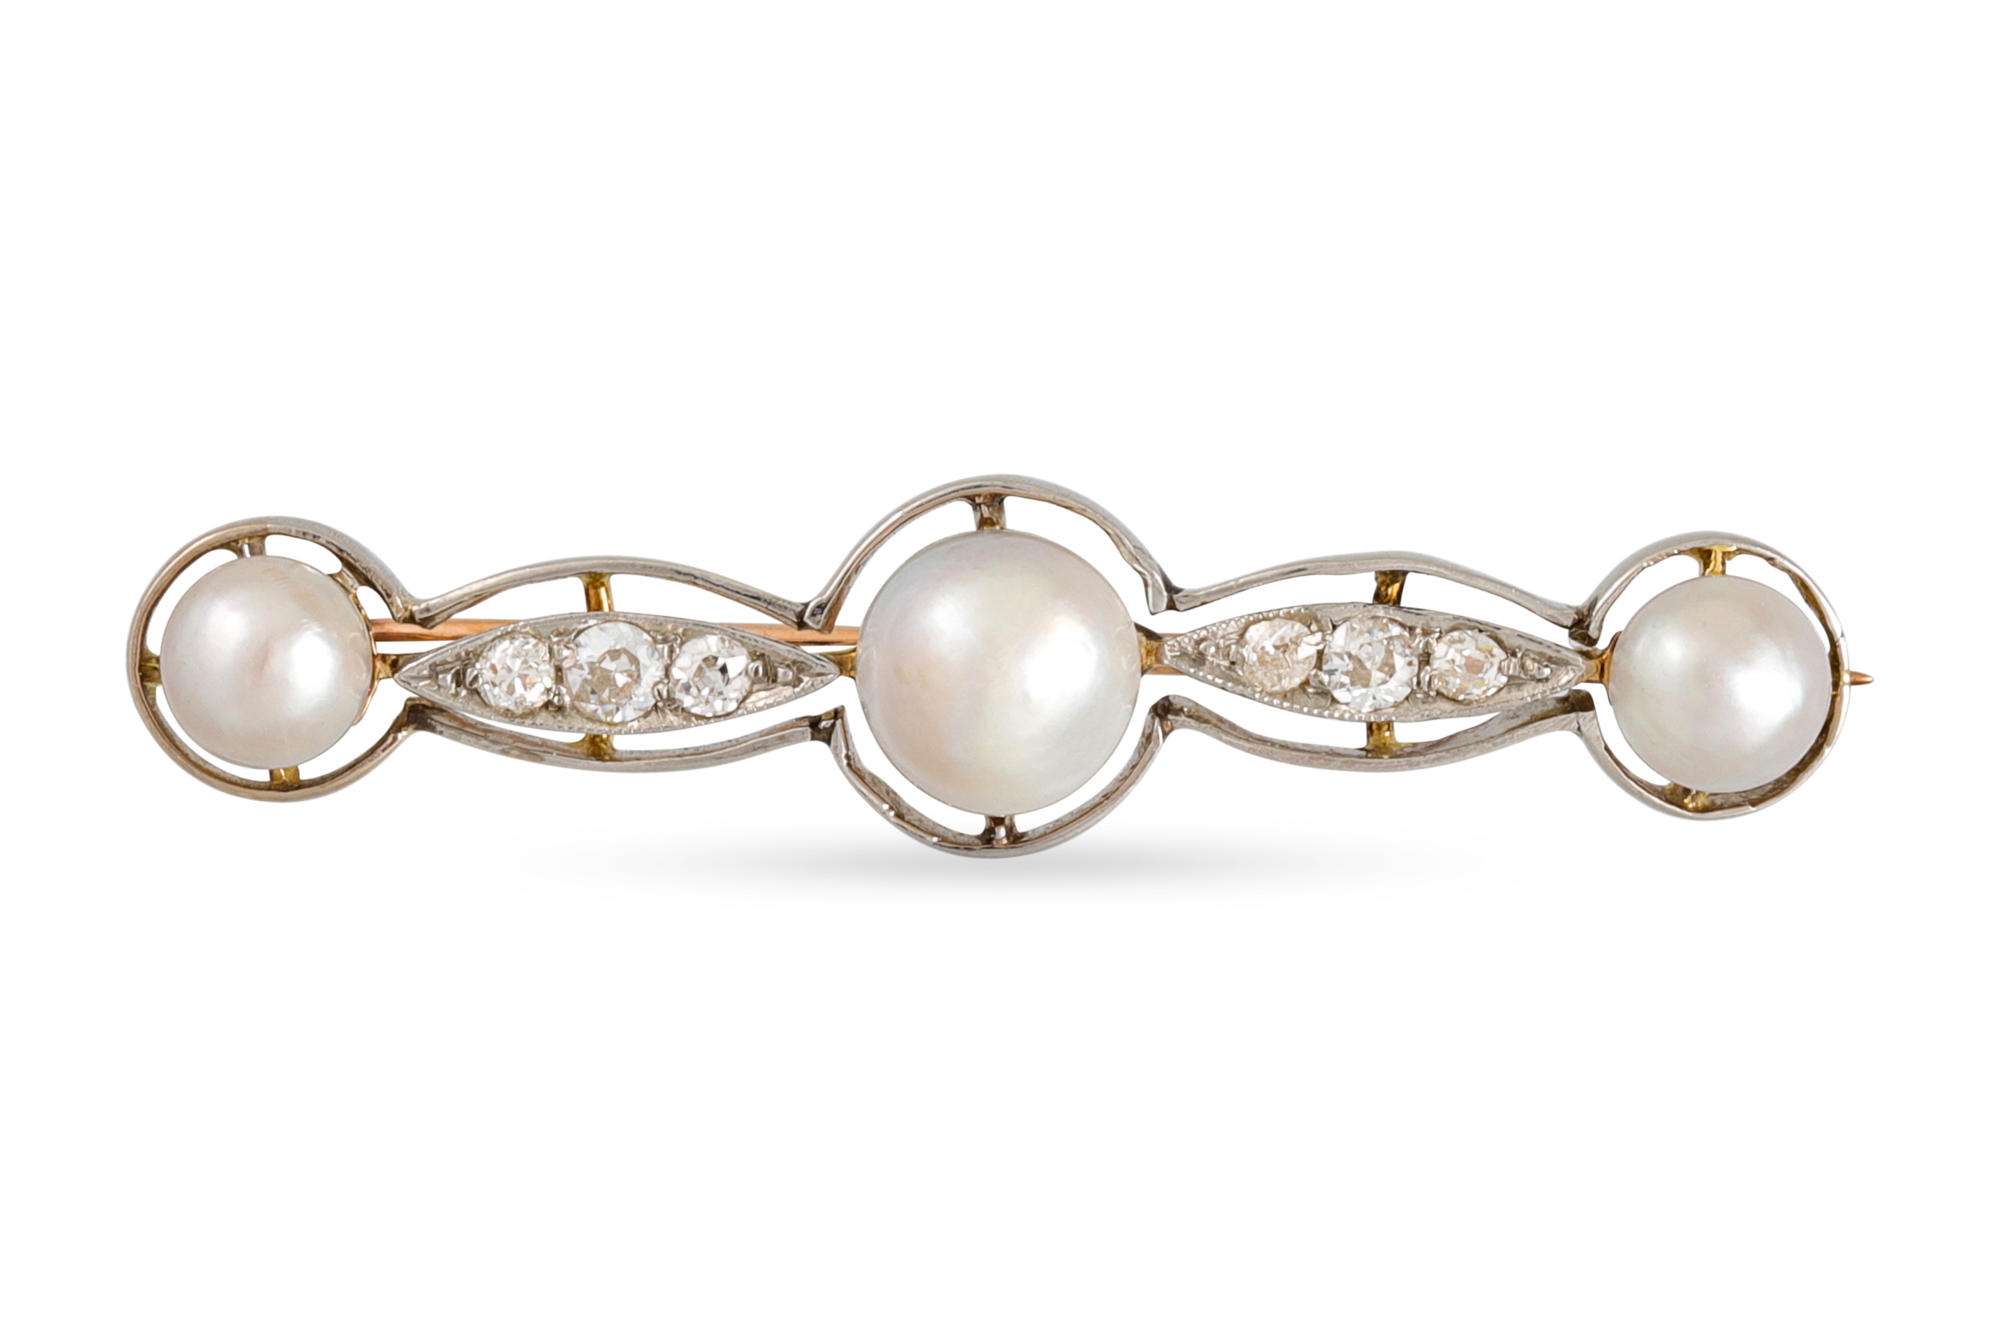 AN ANTIQUE PEARL AND OLD CUT DIAMOND BAR BROOCH, mounted in white and yellow gold, boxed